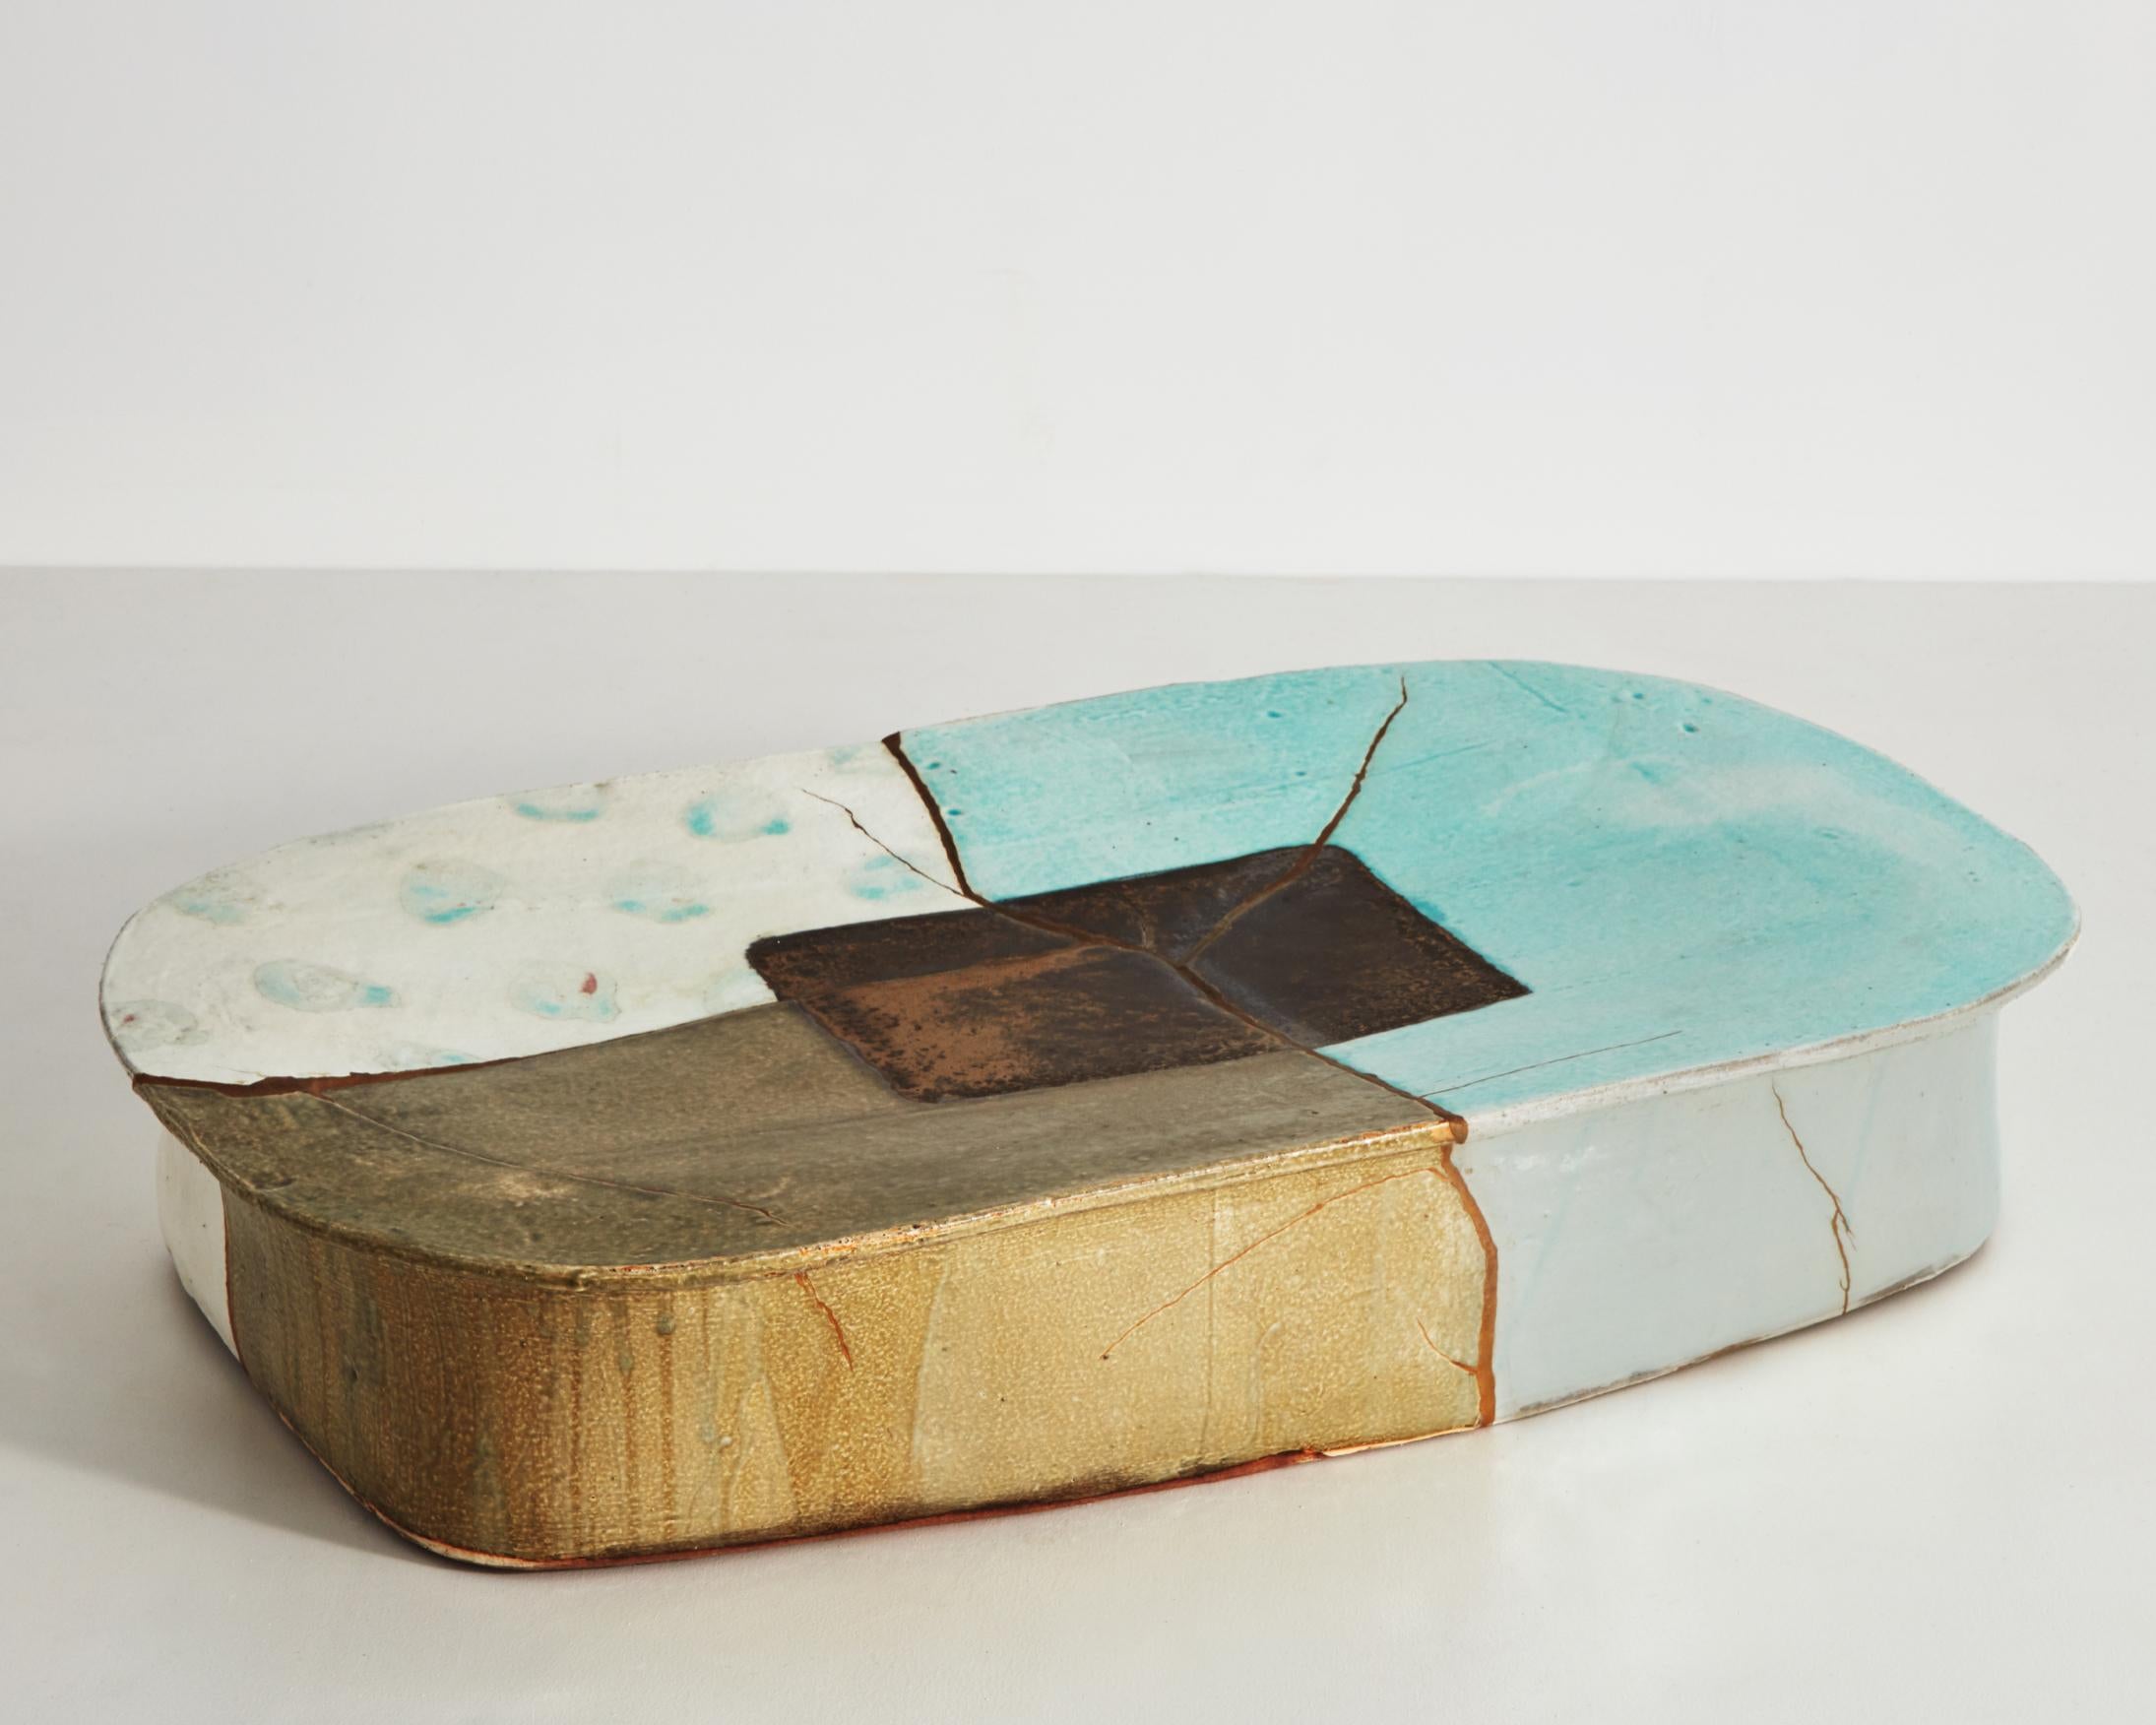 Korean Low Table in Glazed Ceramic by Hun-Chung Lee, 2018